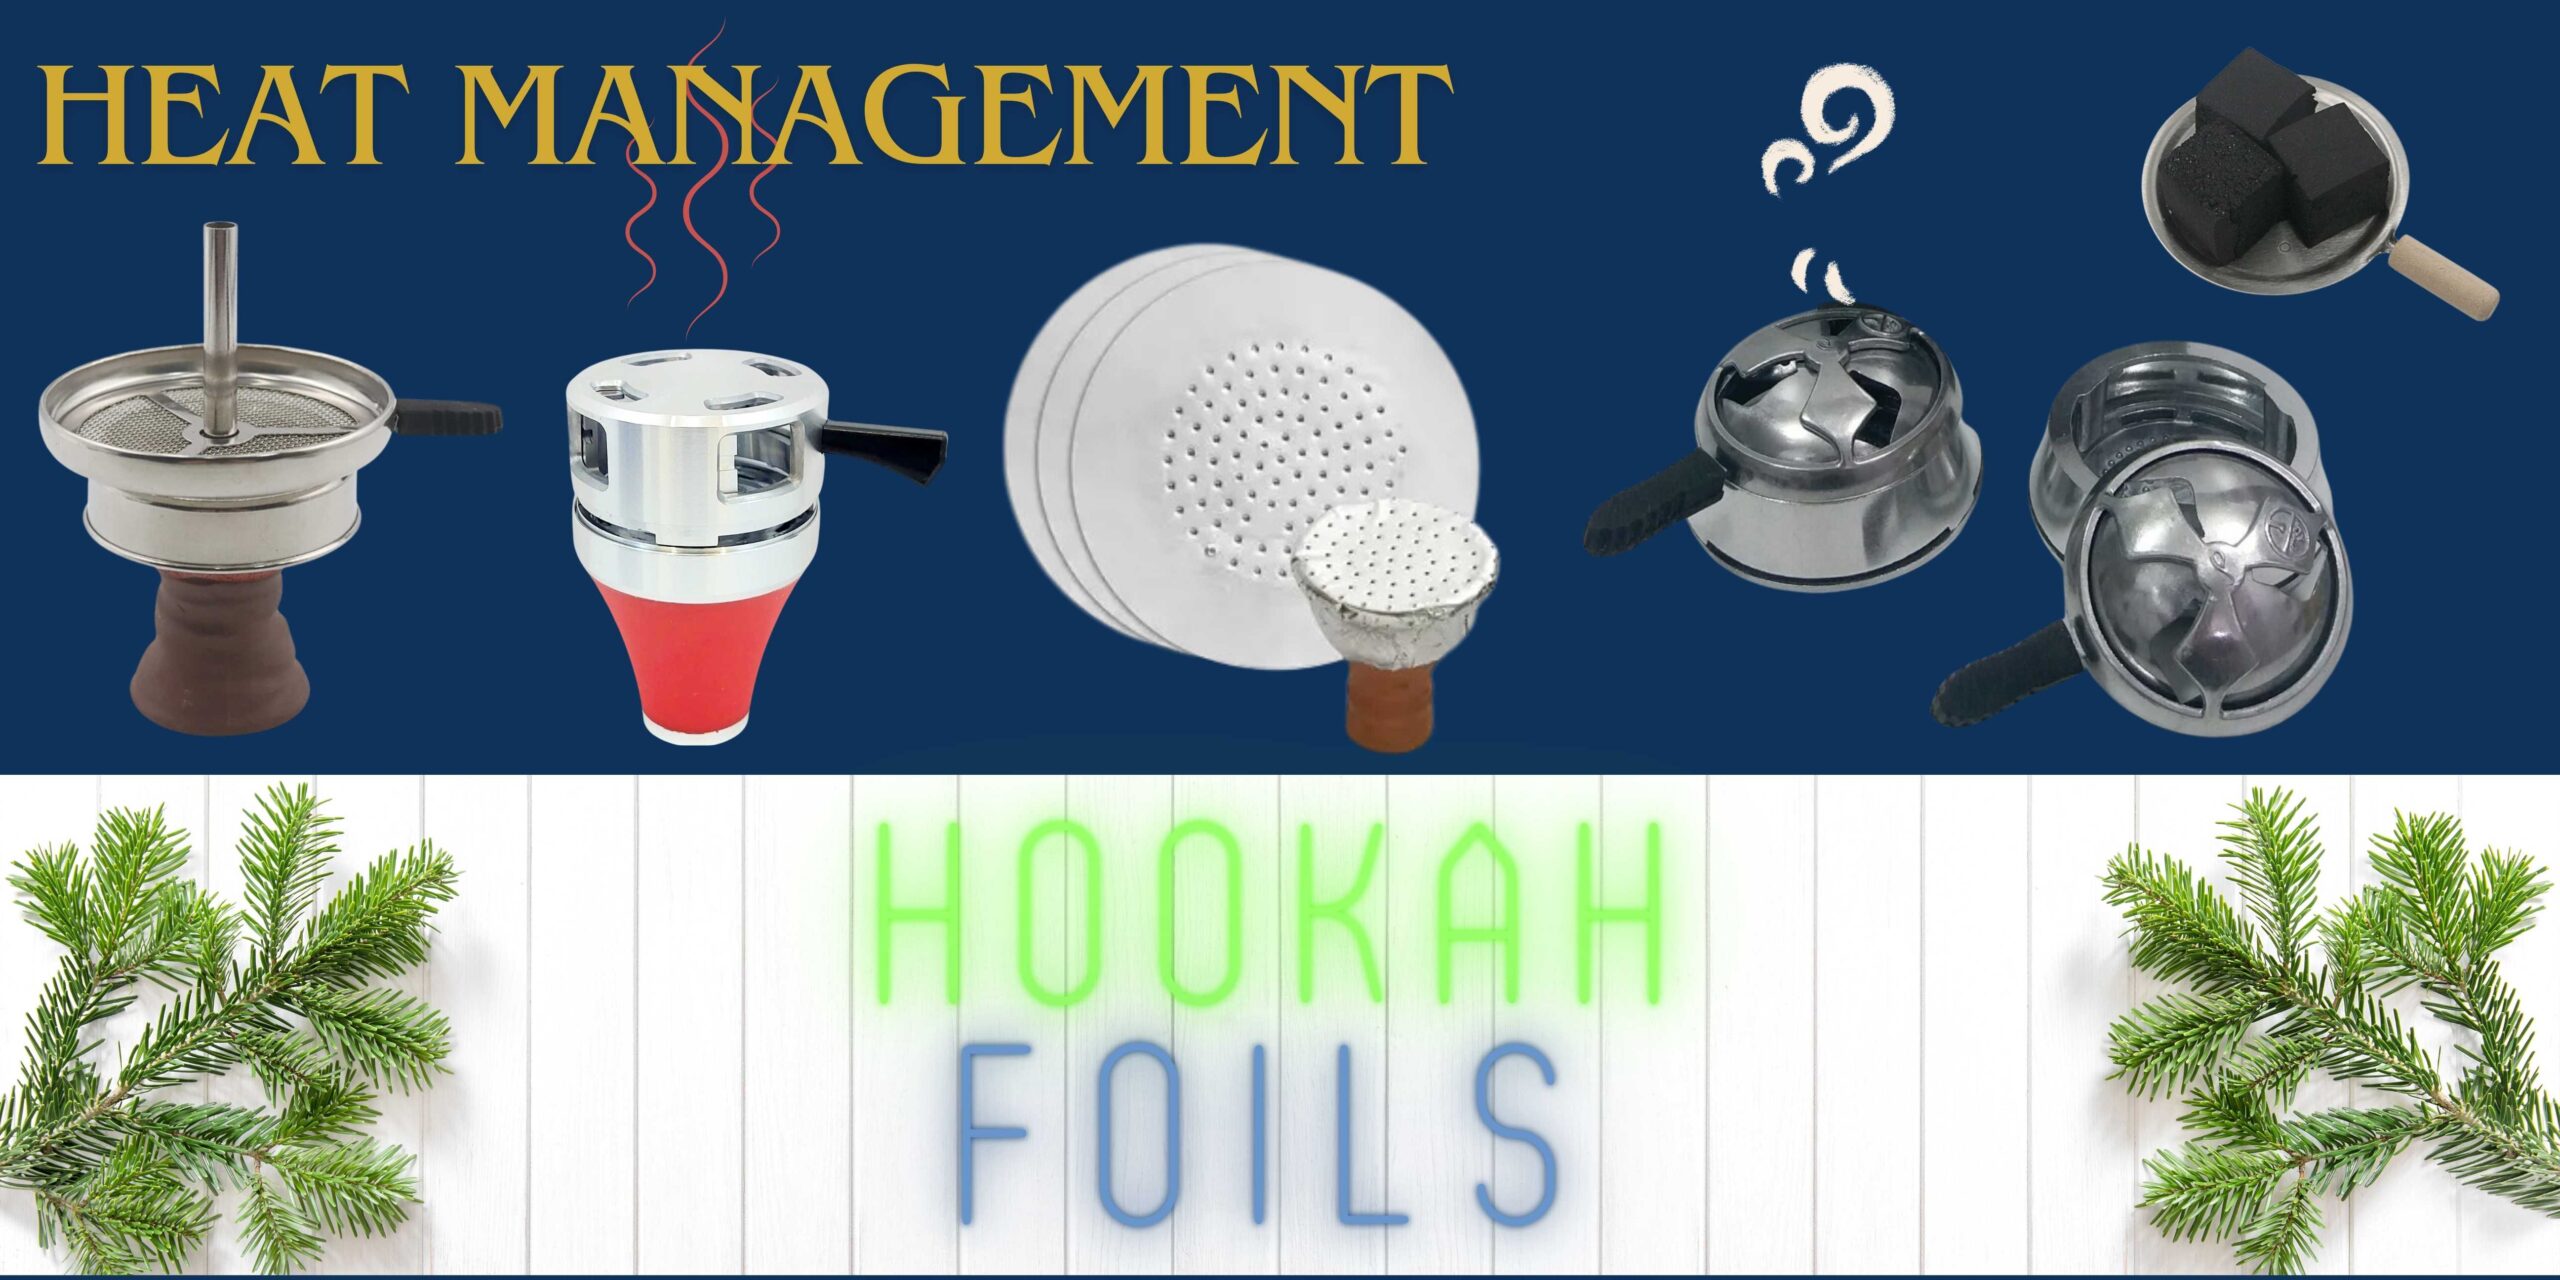 image is about all types of hookah foils